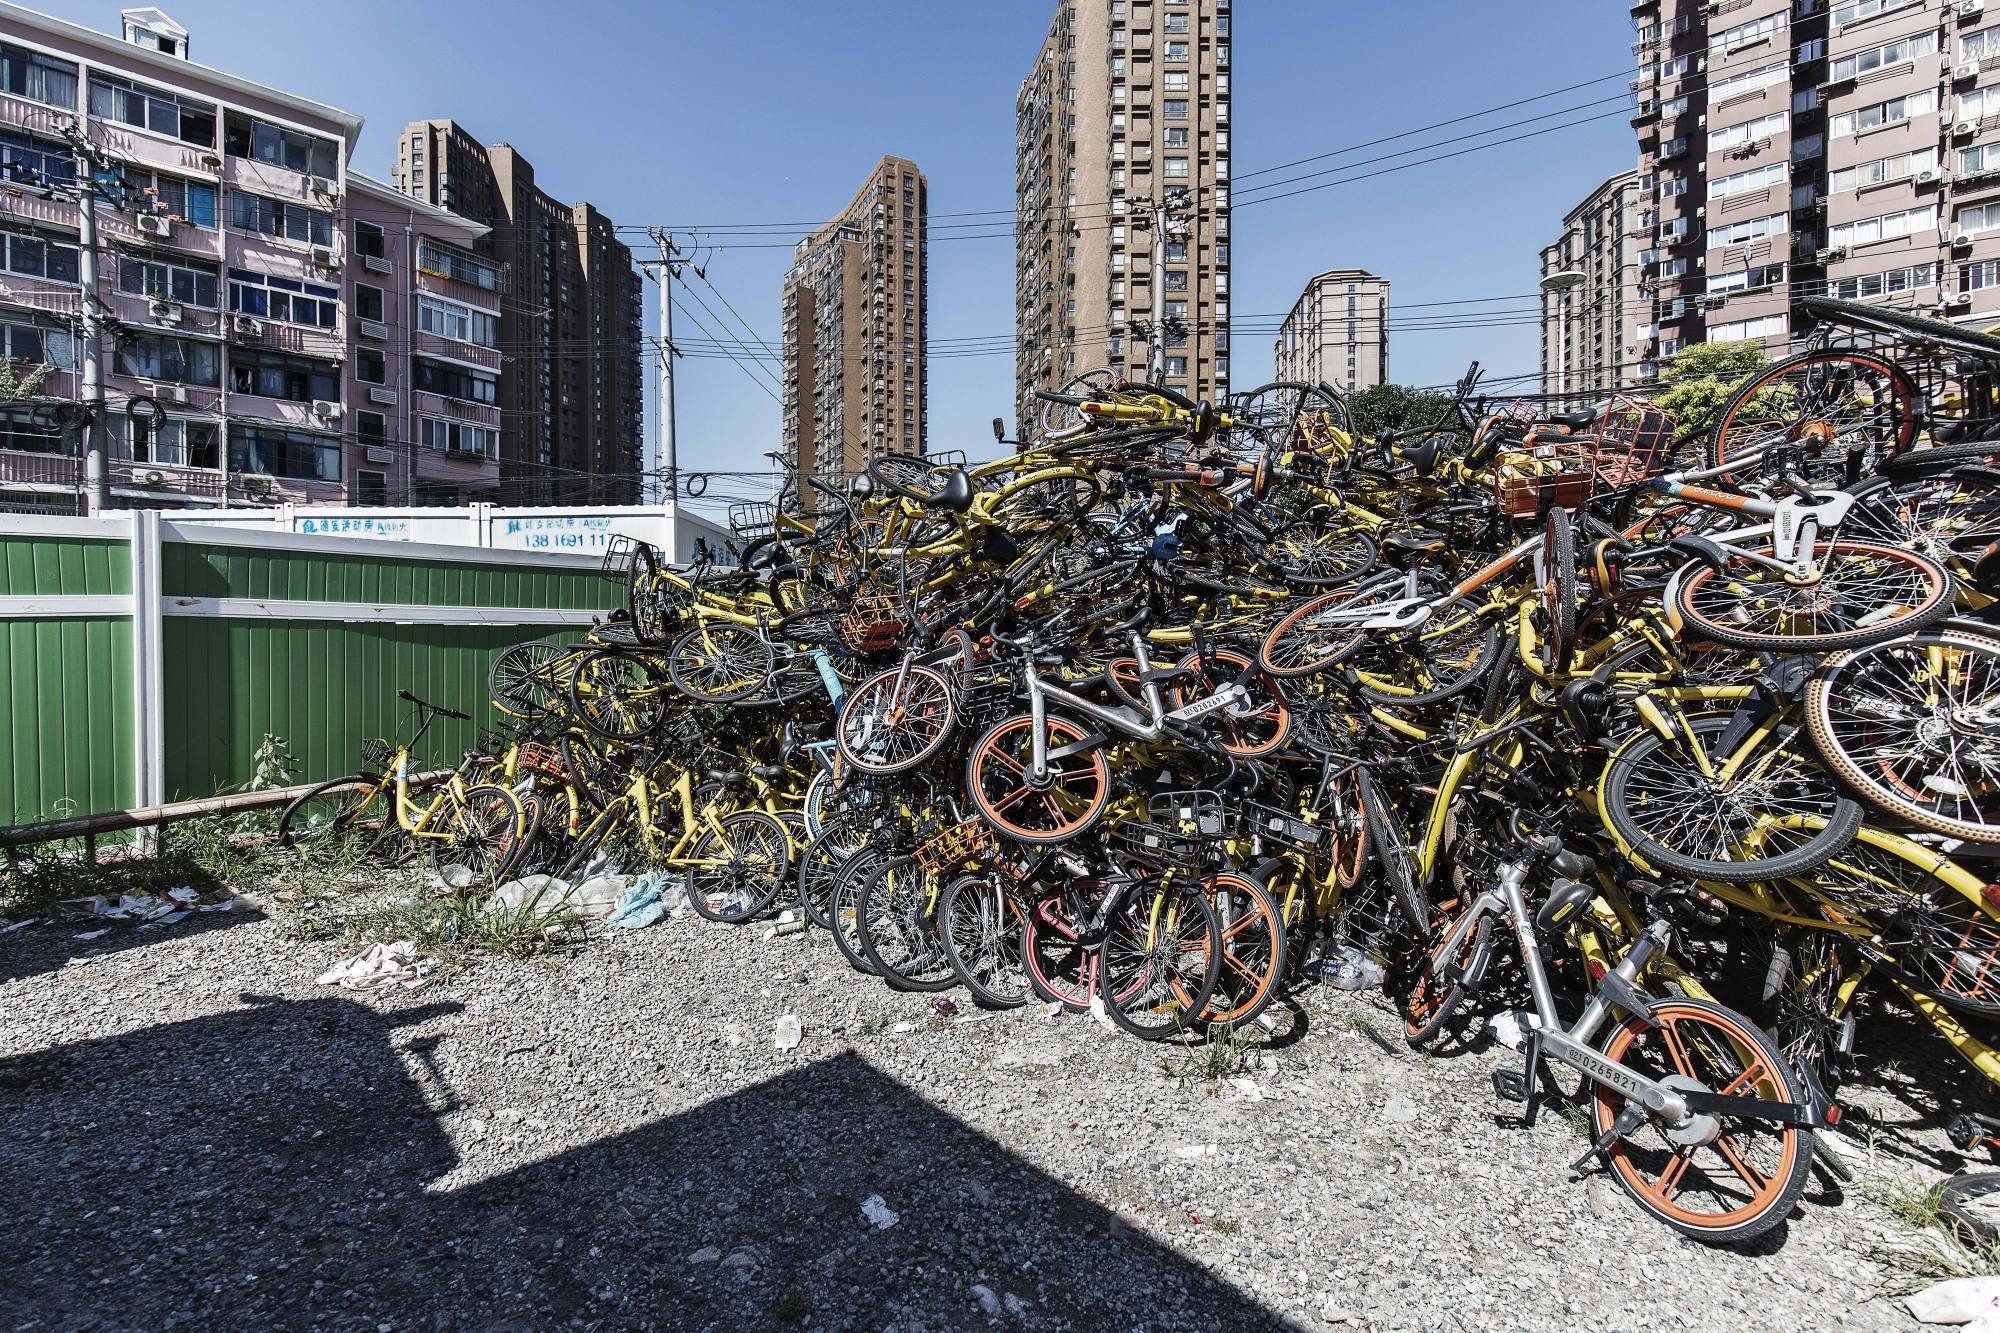 Ride-Sharing Bicycles on the Streets of Shanghai
